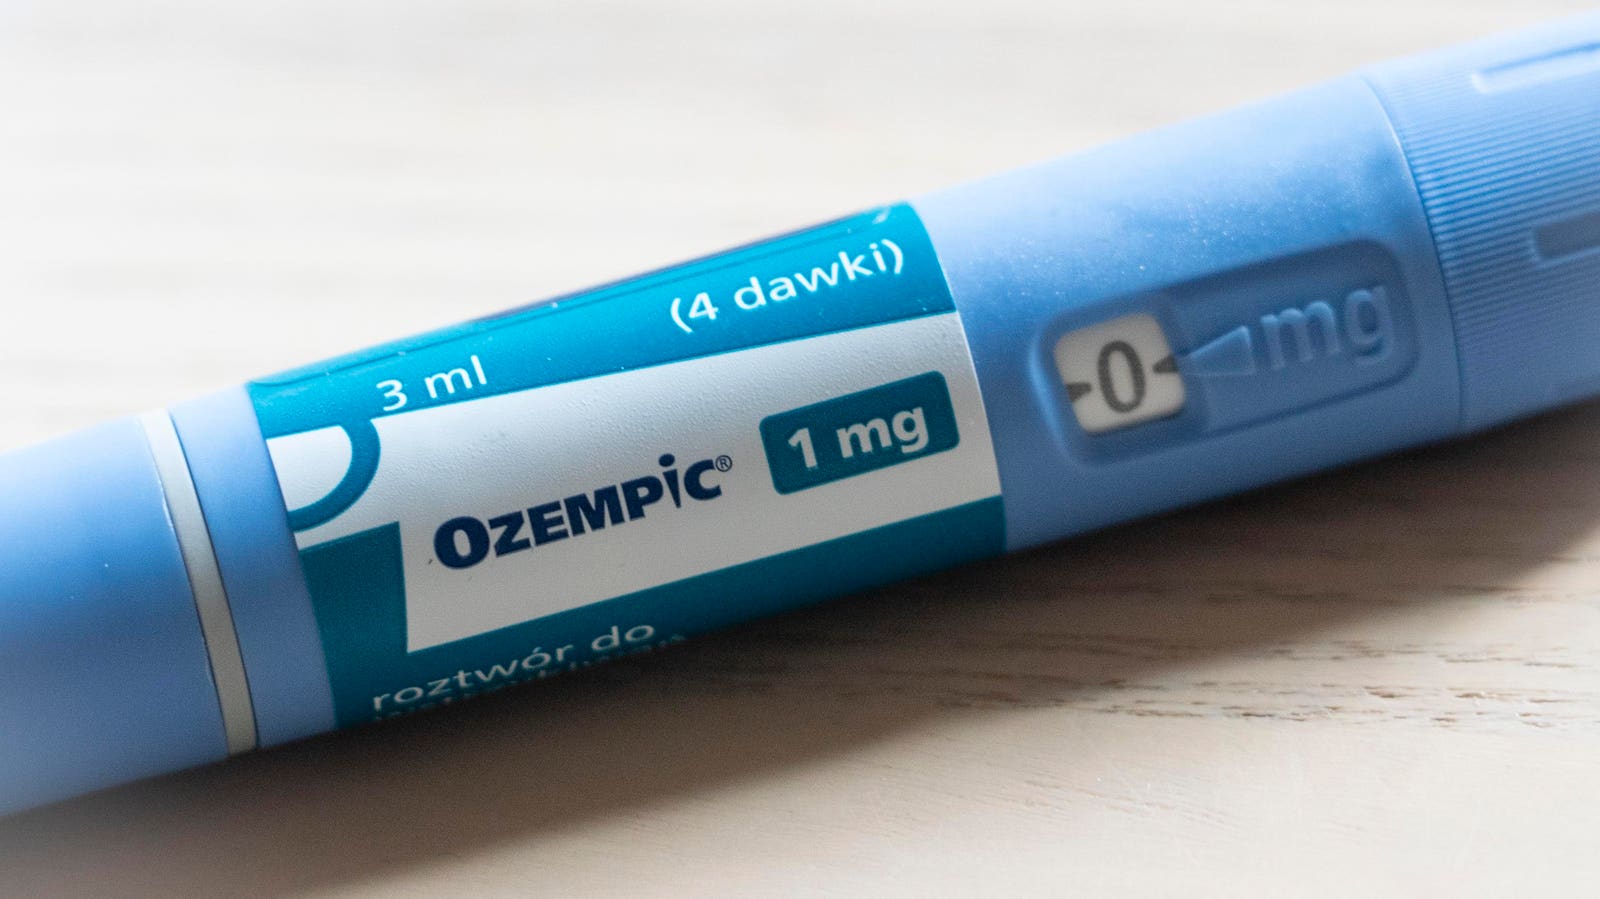 New Diabetes Guidelines For Ozempic And Other GLP-1 Use